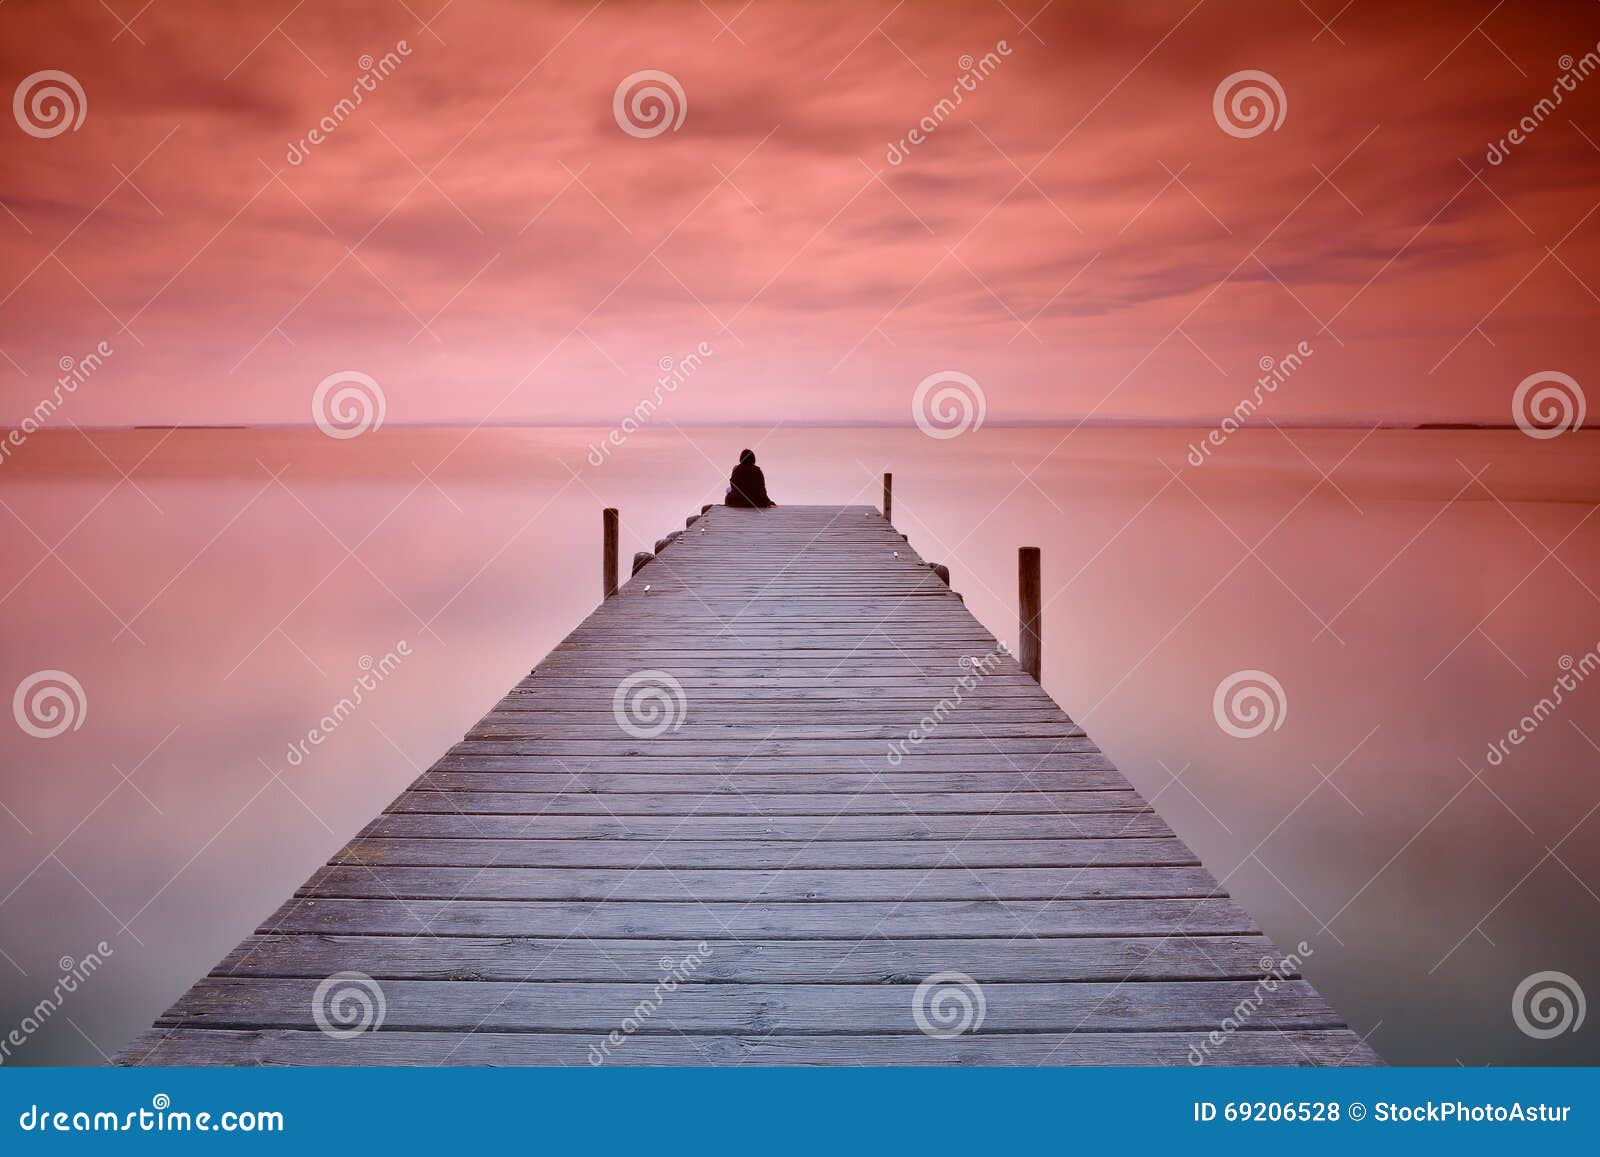 lonely person sitting on pier